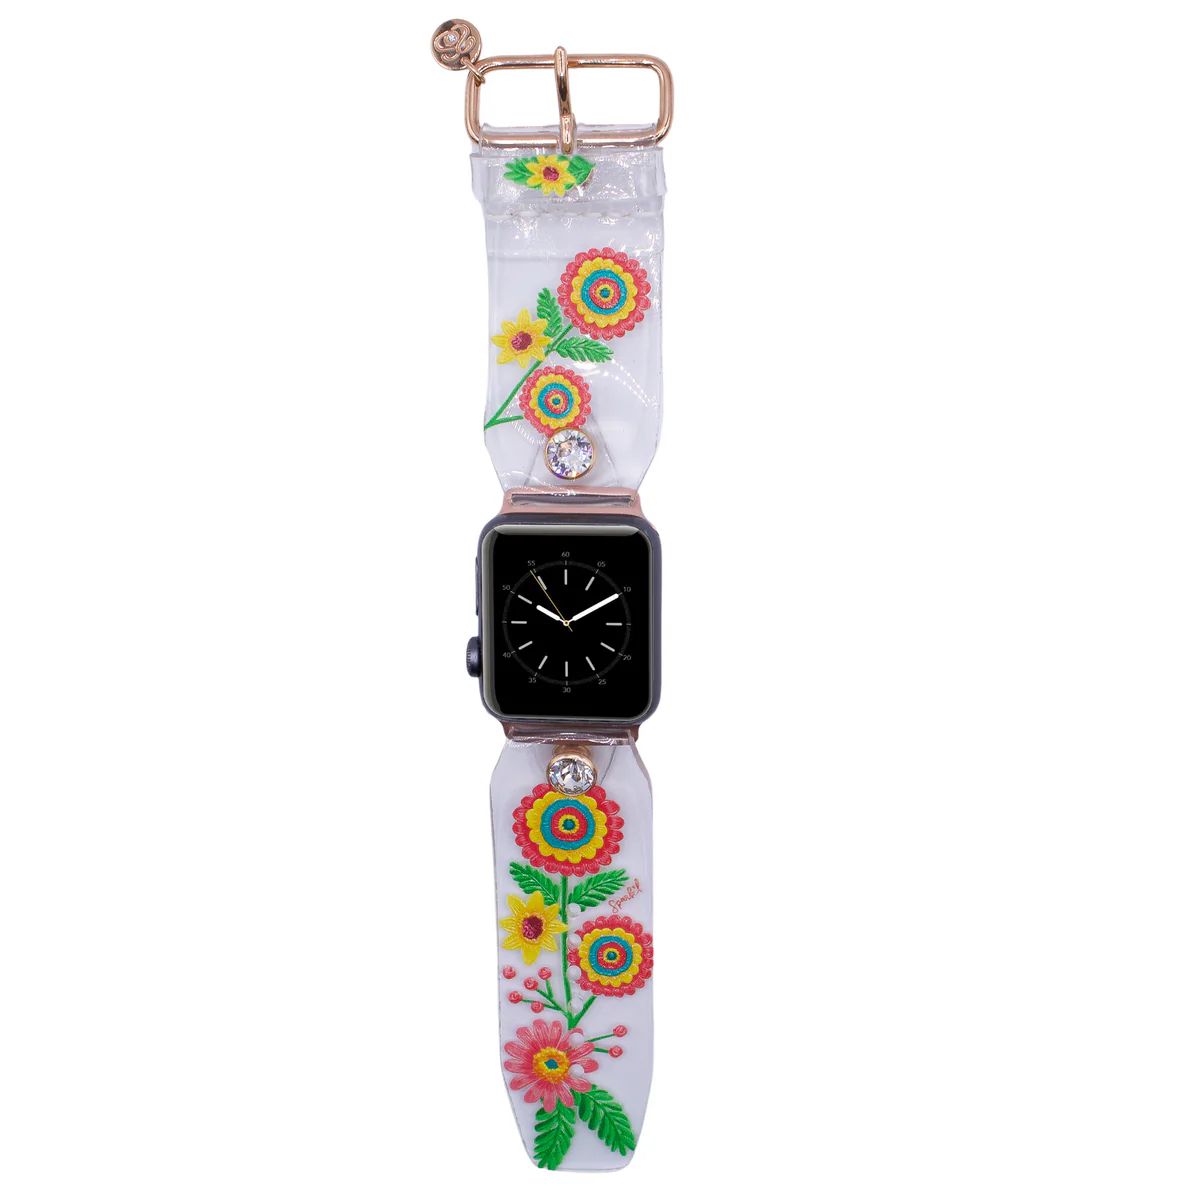 Limited Edition - "Flores" Waterproof Sivella Watchband | Spark*l